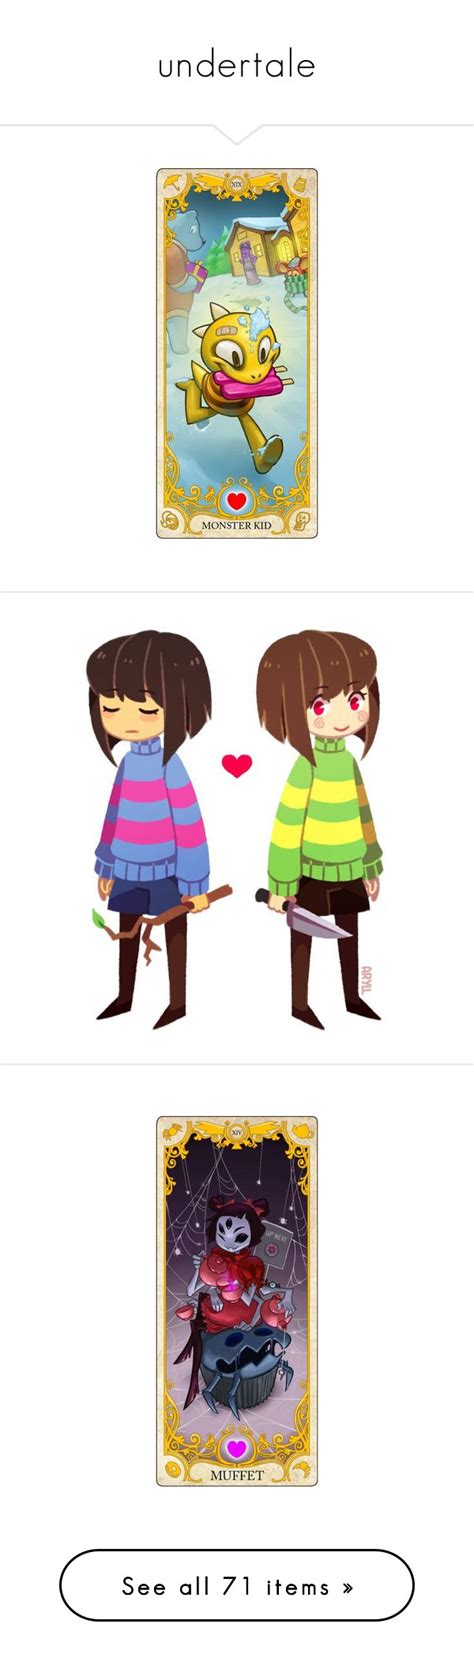 Undertale By Coollolkid Liked On Polyvore Featuring Games Fanart